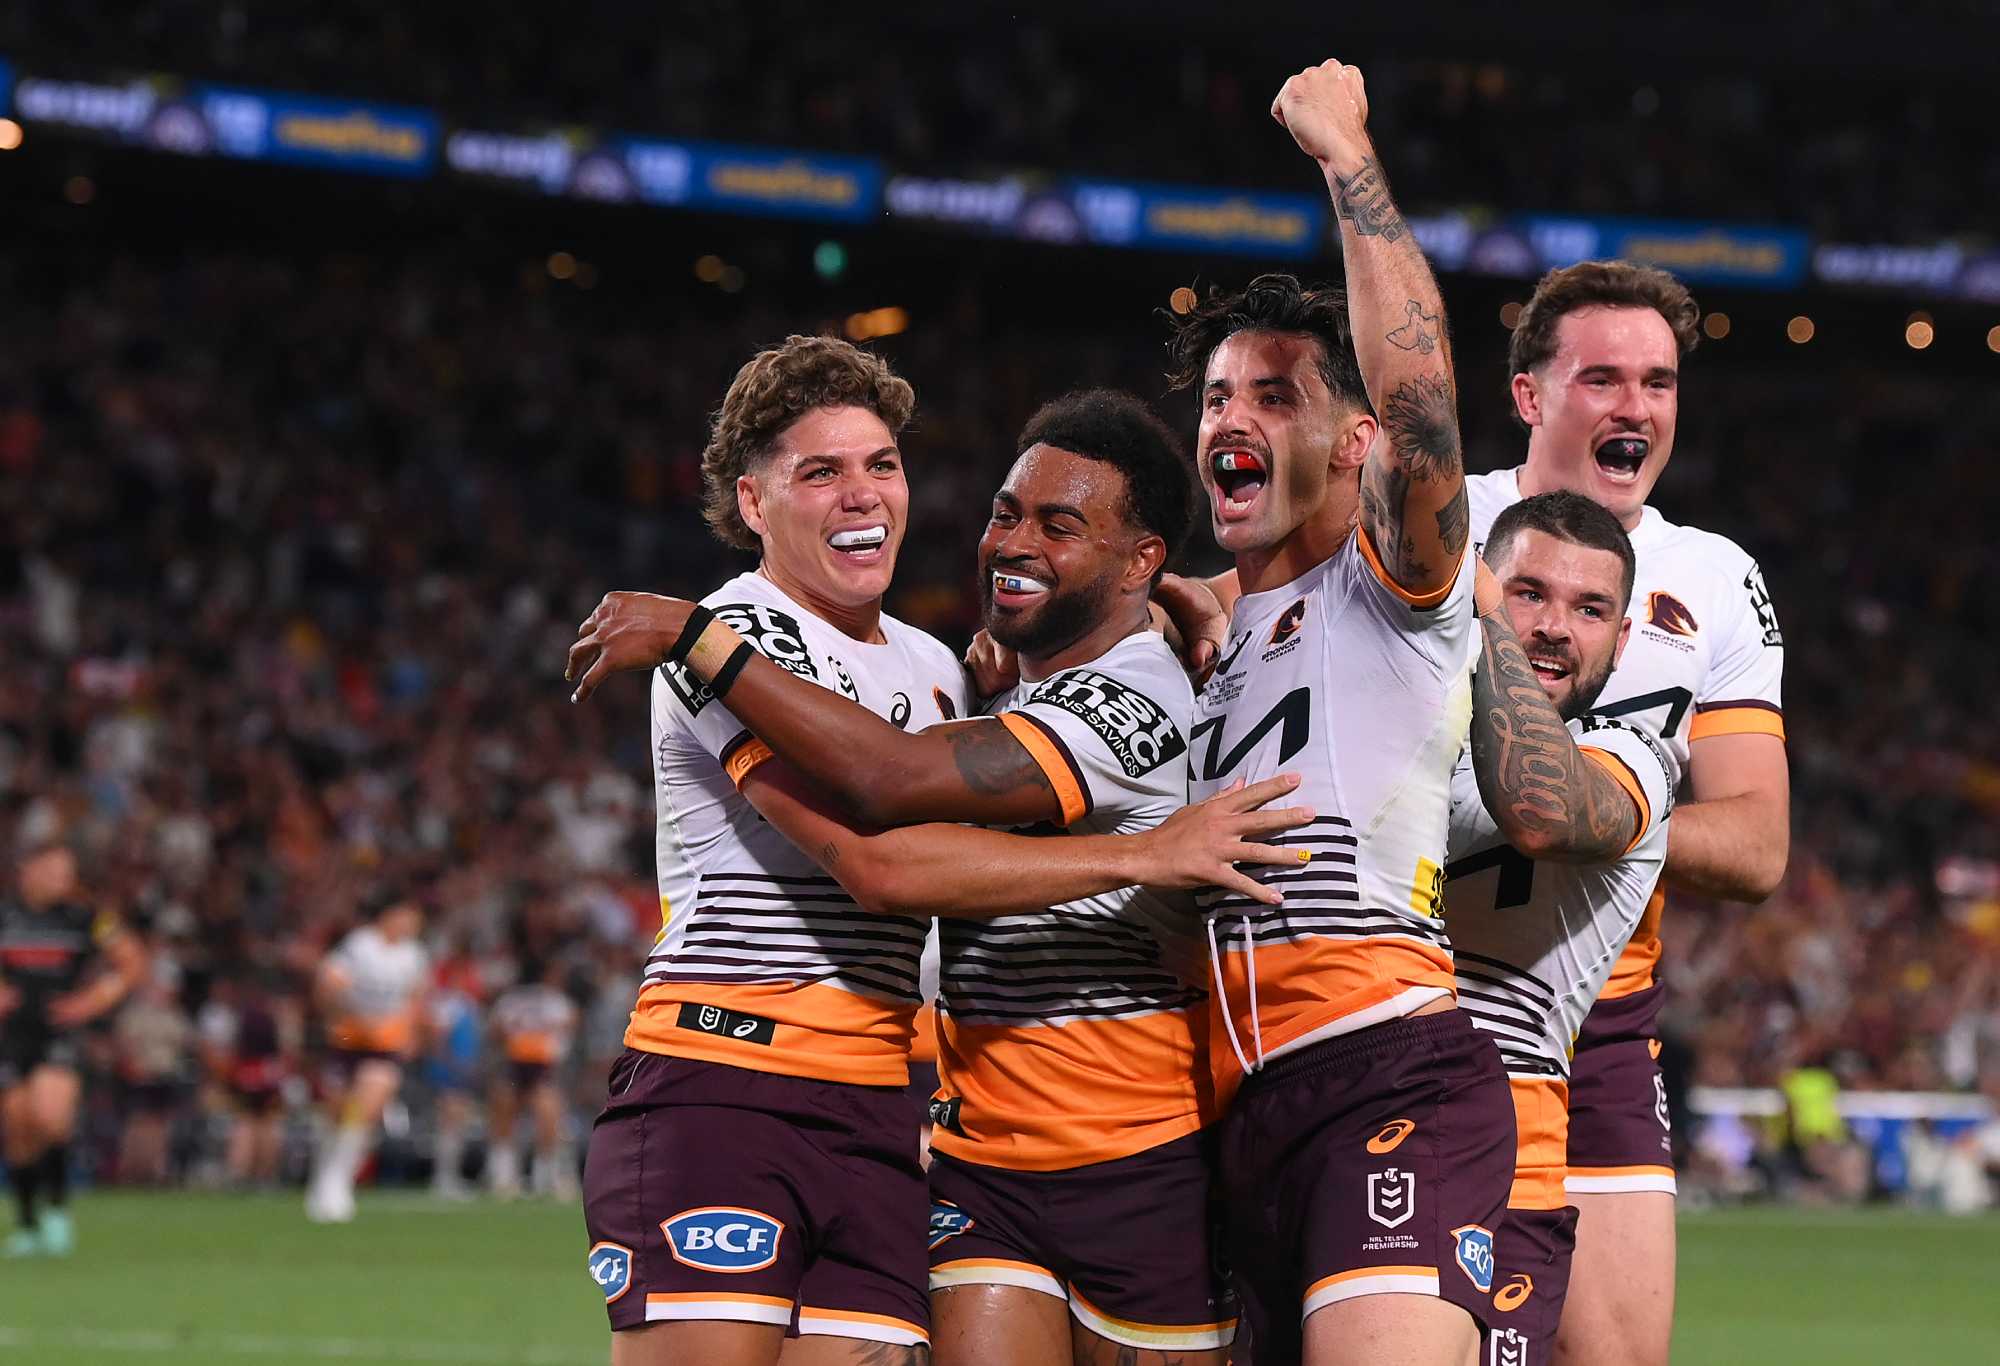 SYDNEY, AUSTRALIA - OCTOBER 01: Ezra Mam of the Broncos celebrates with team mates after scoring a try during the 2023 NRL Grand Final match between Penrith Panthers and Brisbane Broncos at Accor Stadium on October 01, 2023 in Sydney, Australia. (Photo by Bradley Kanaris/Getty Images)